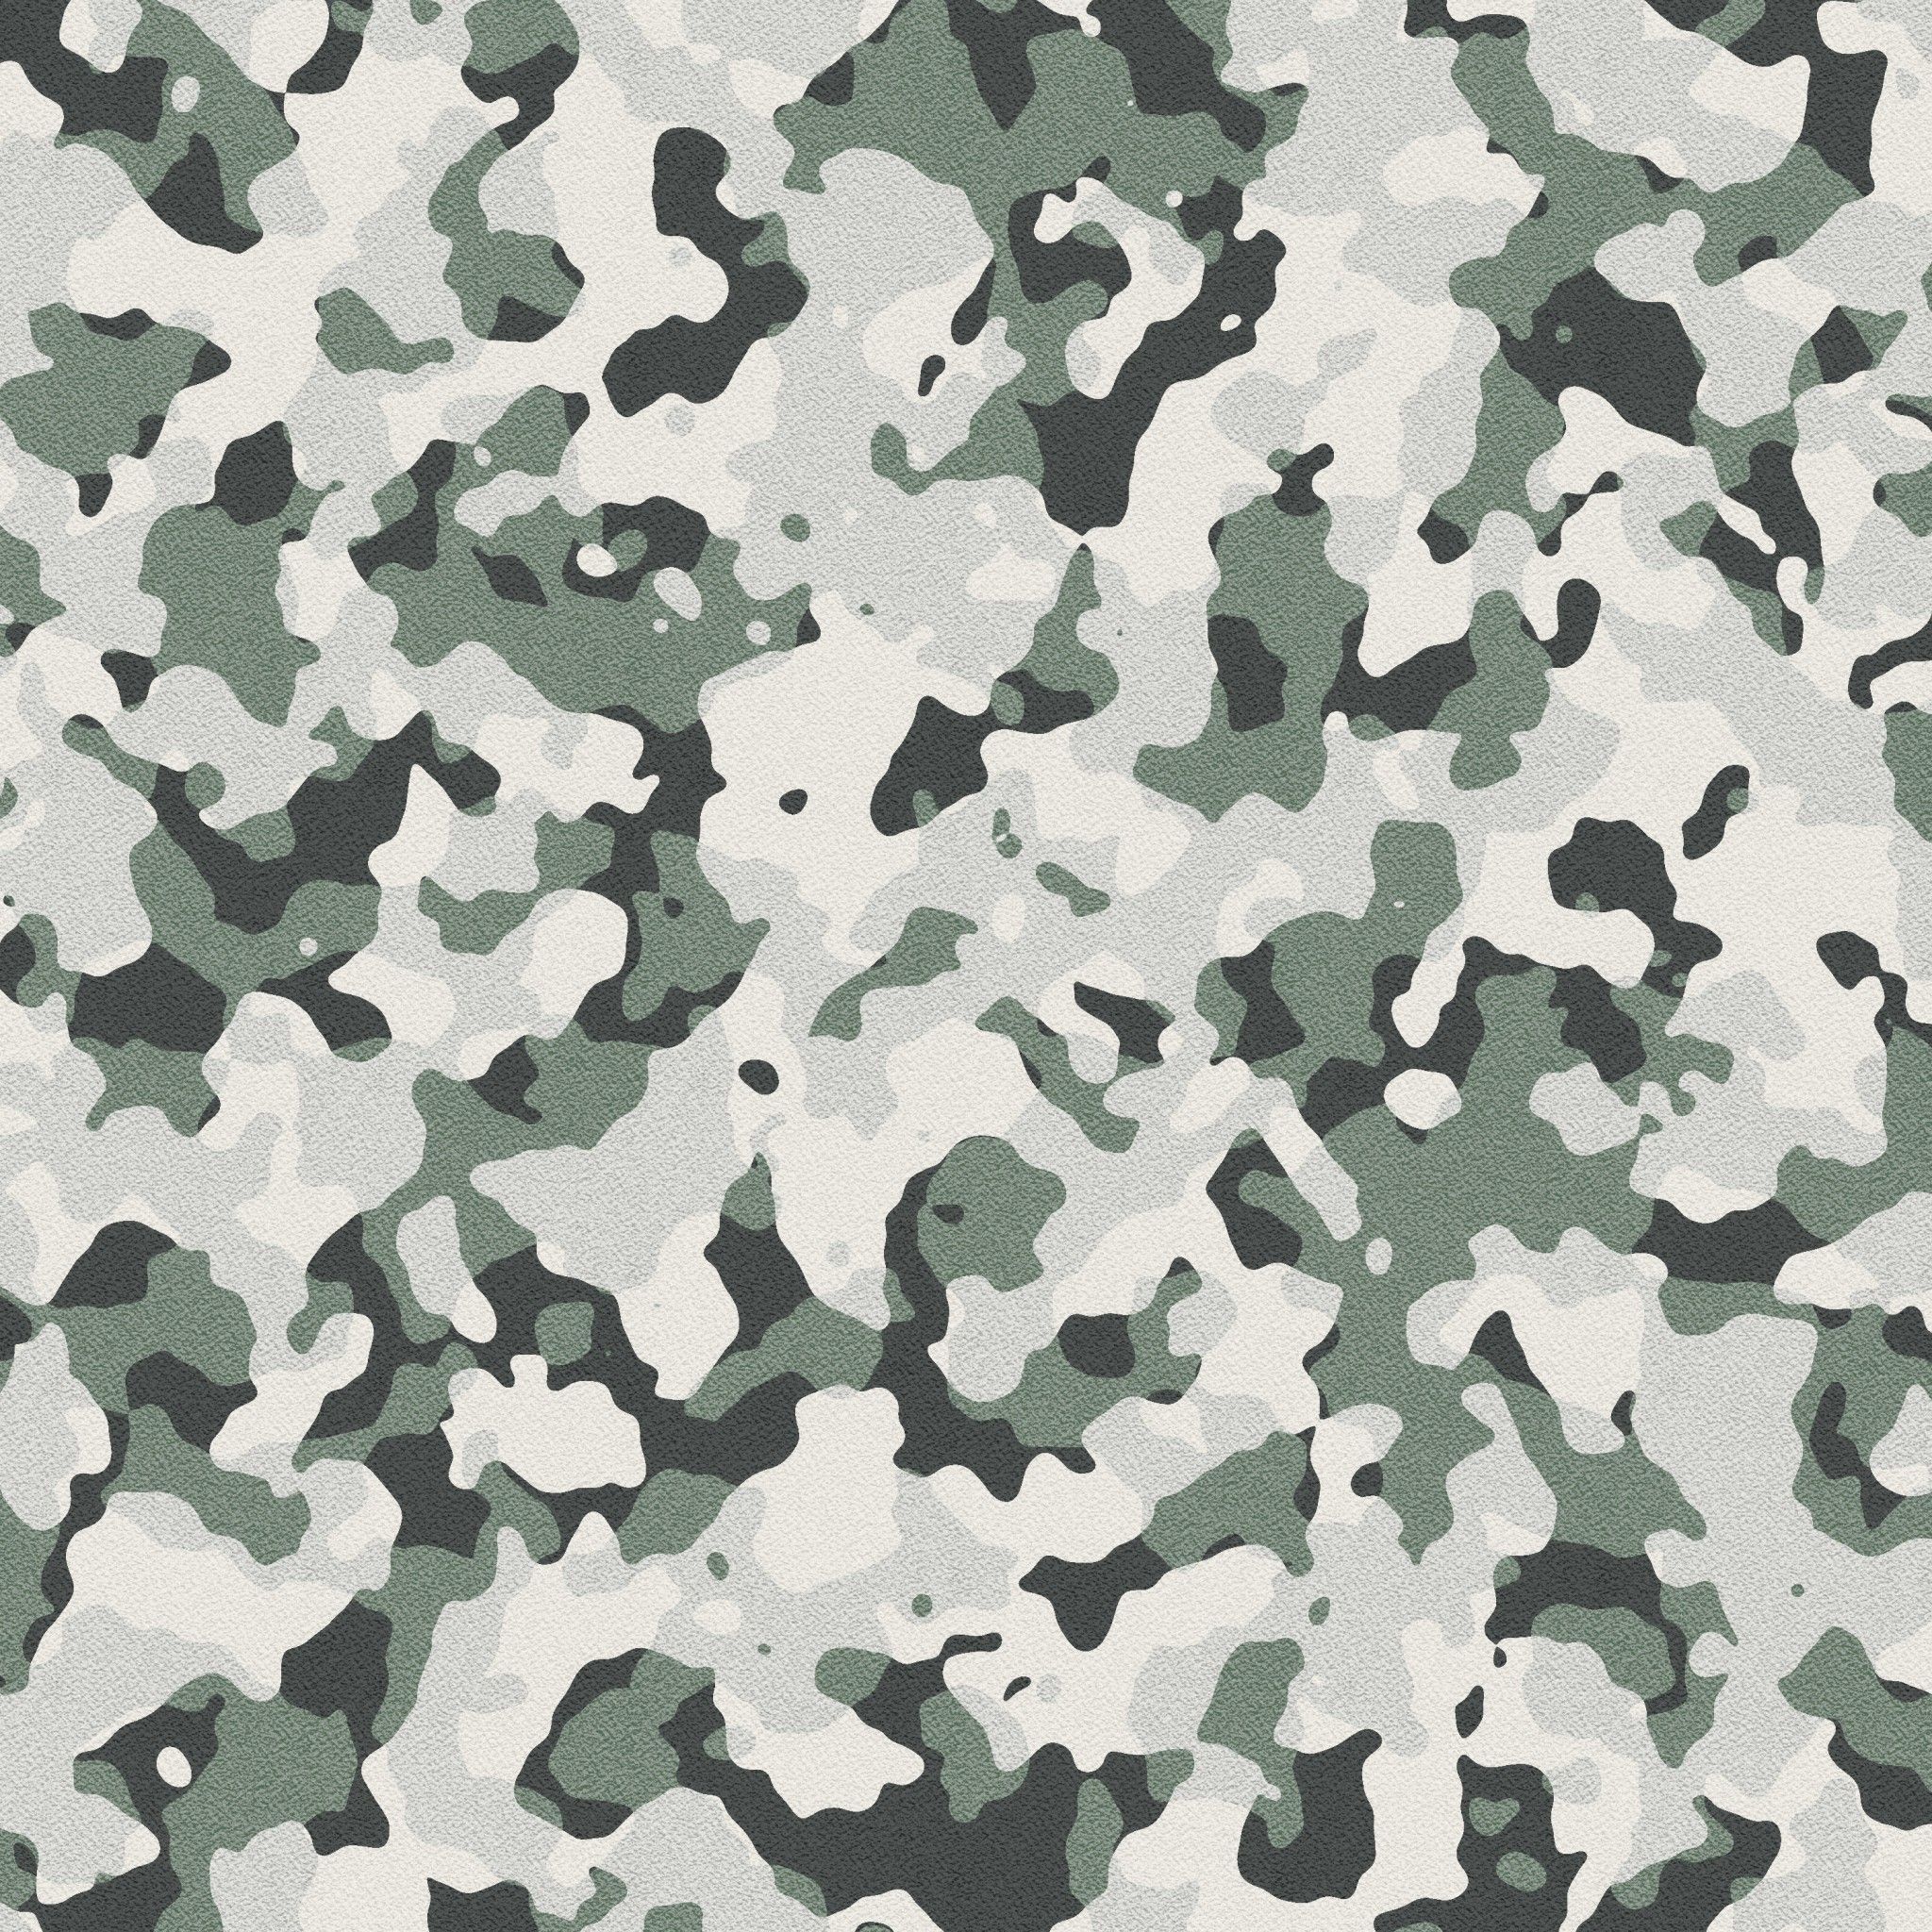 Camouflage White Grey to see more awesome camouflage army